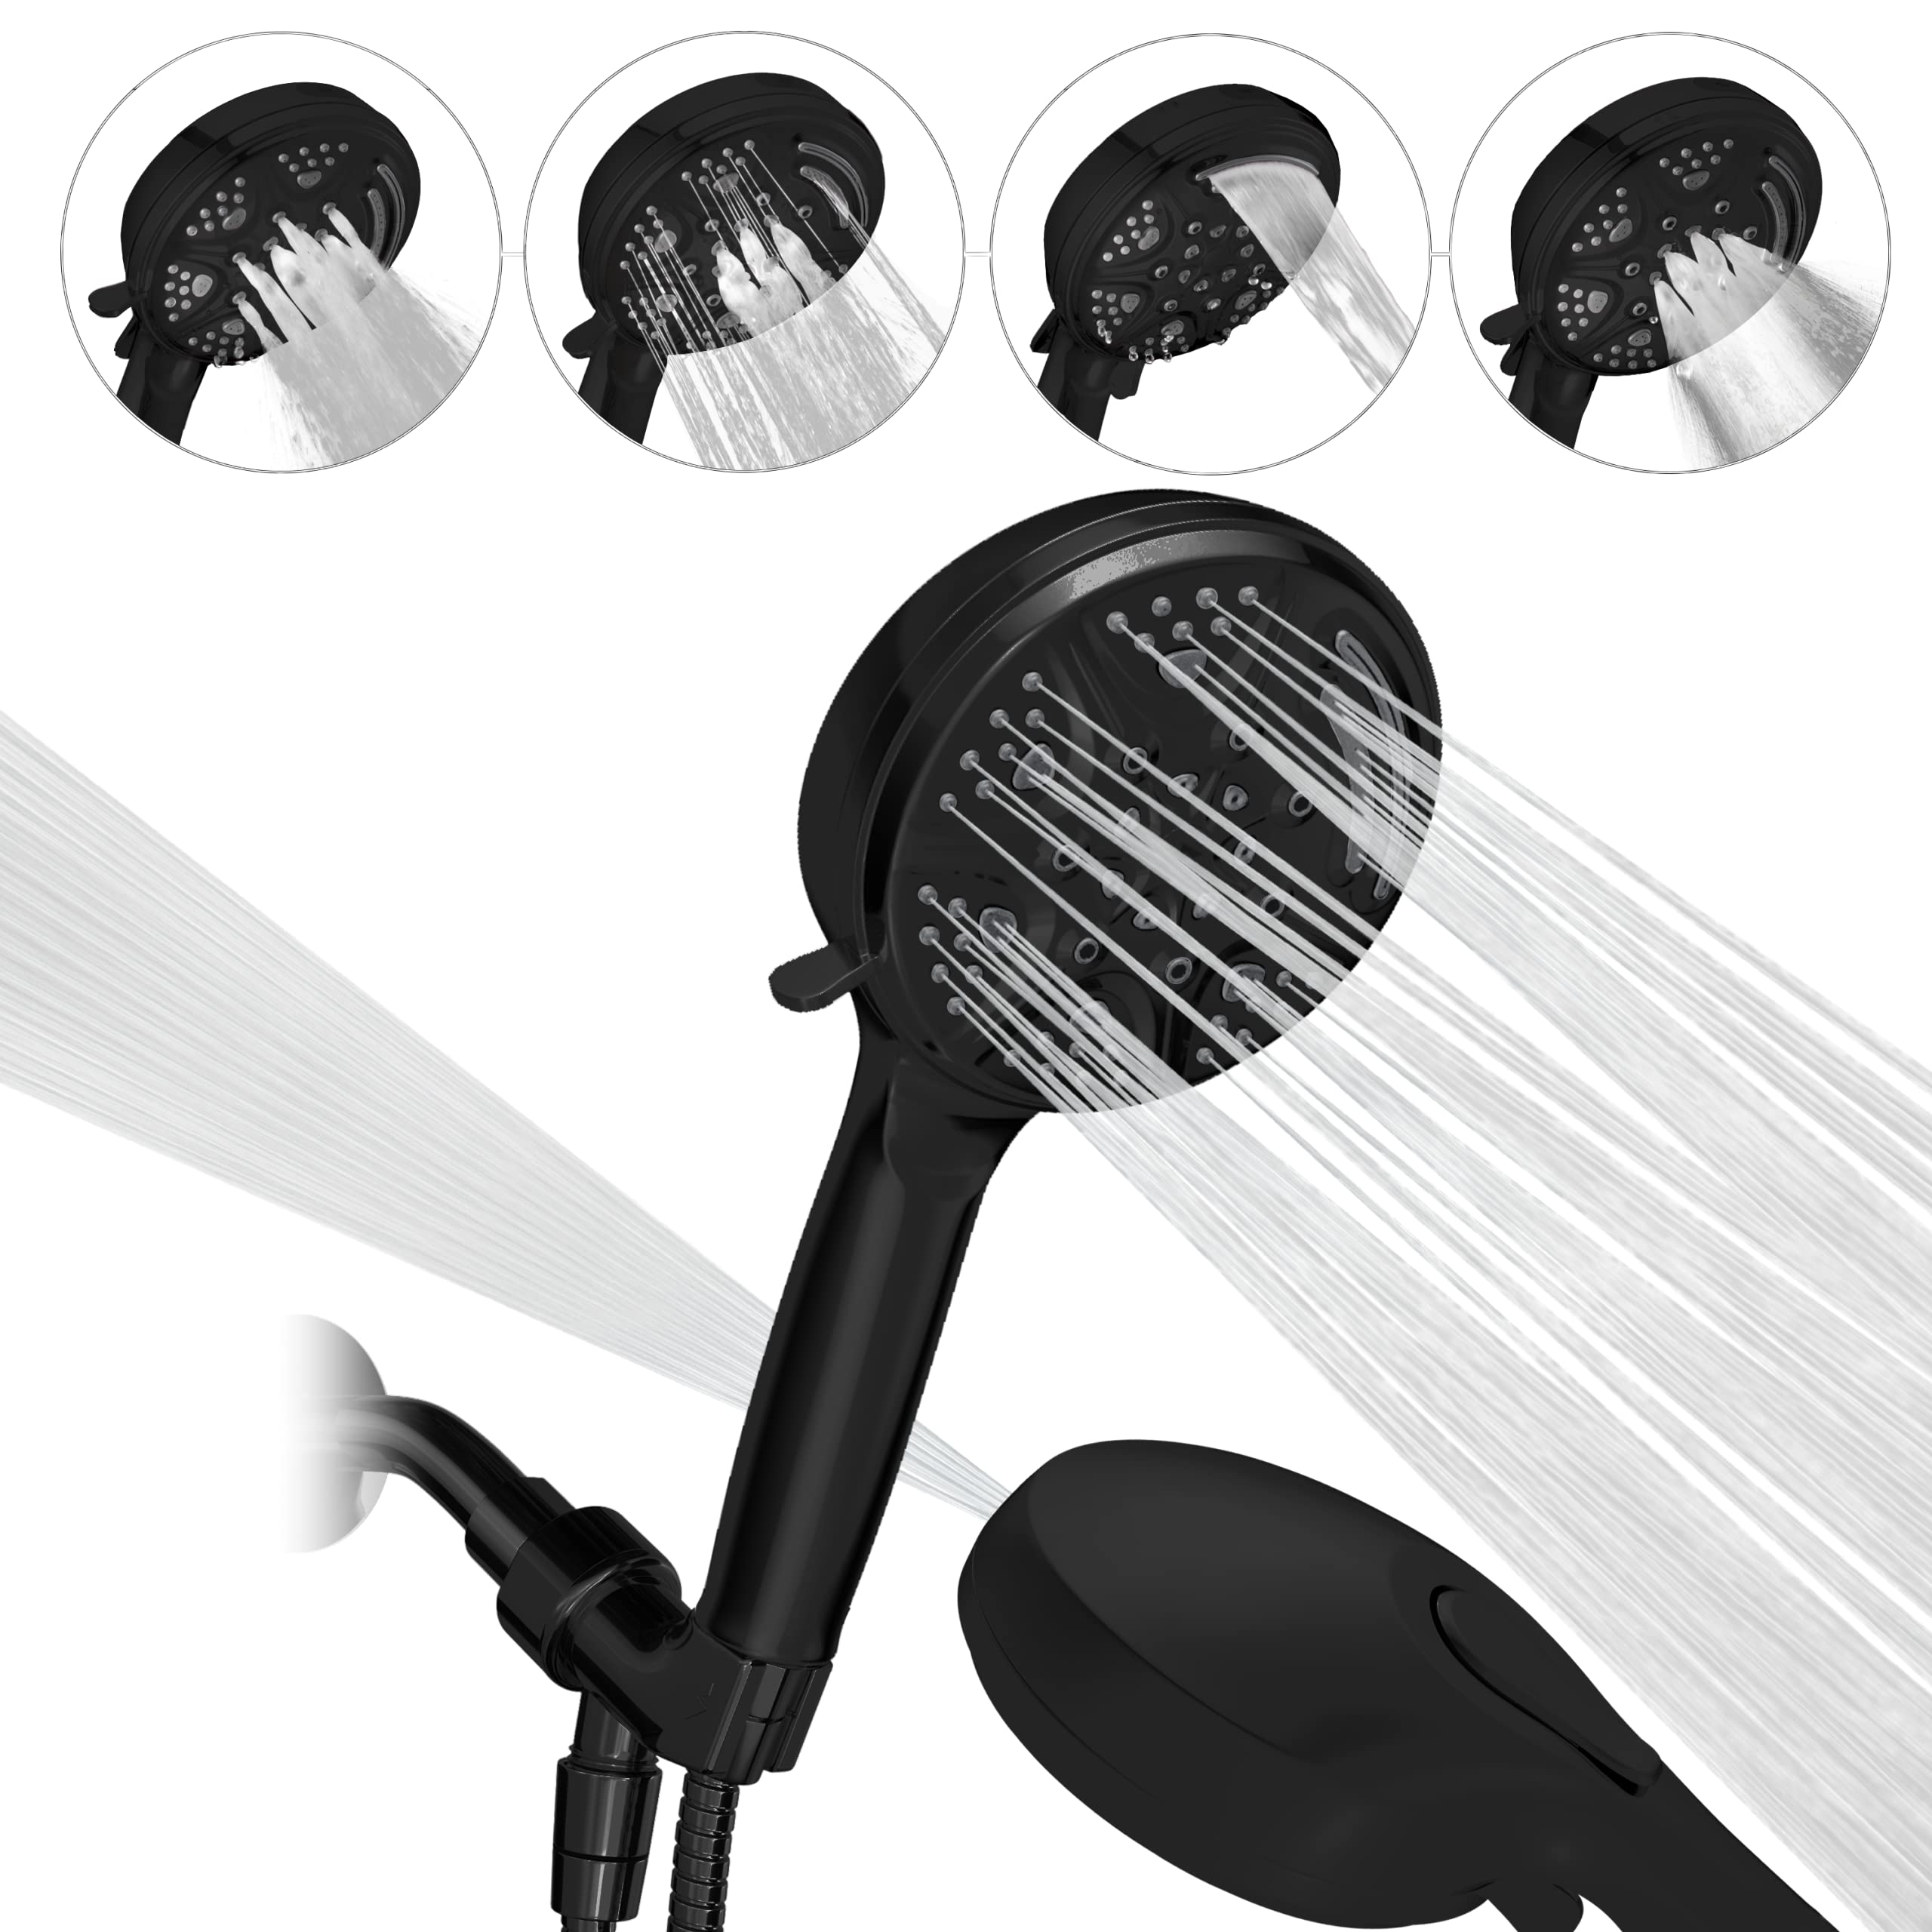 Sparkpod 5 Inch 9 Spray Setting Shower Head - Handheld High Pressure Jet With Onoff Switch, Pause And Waterfall Setting- Premium